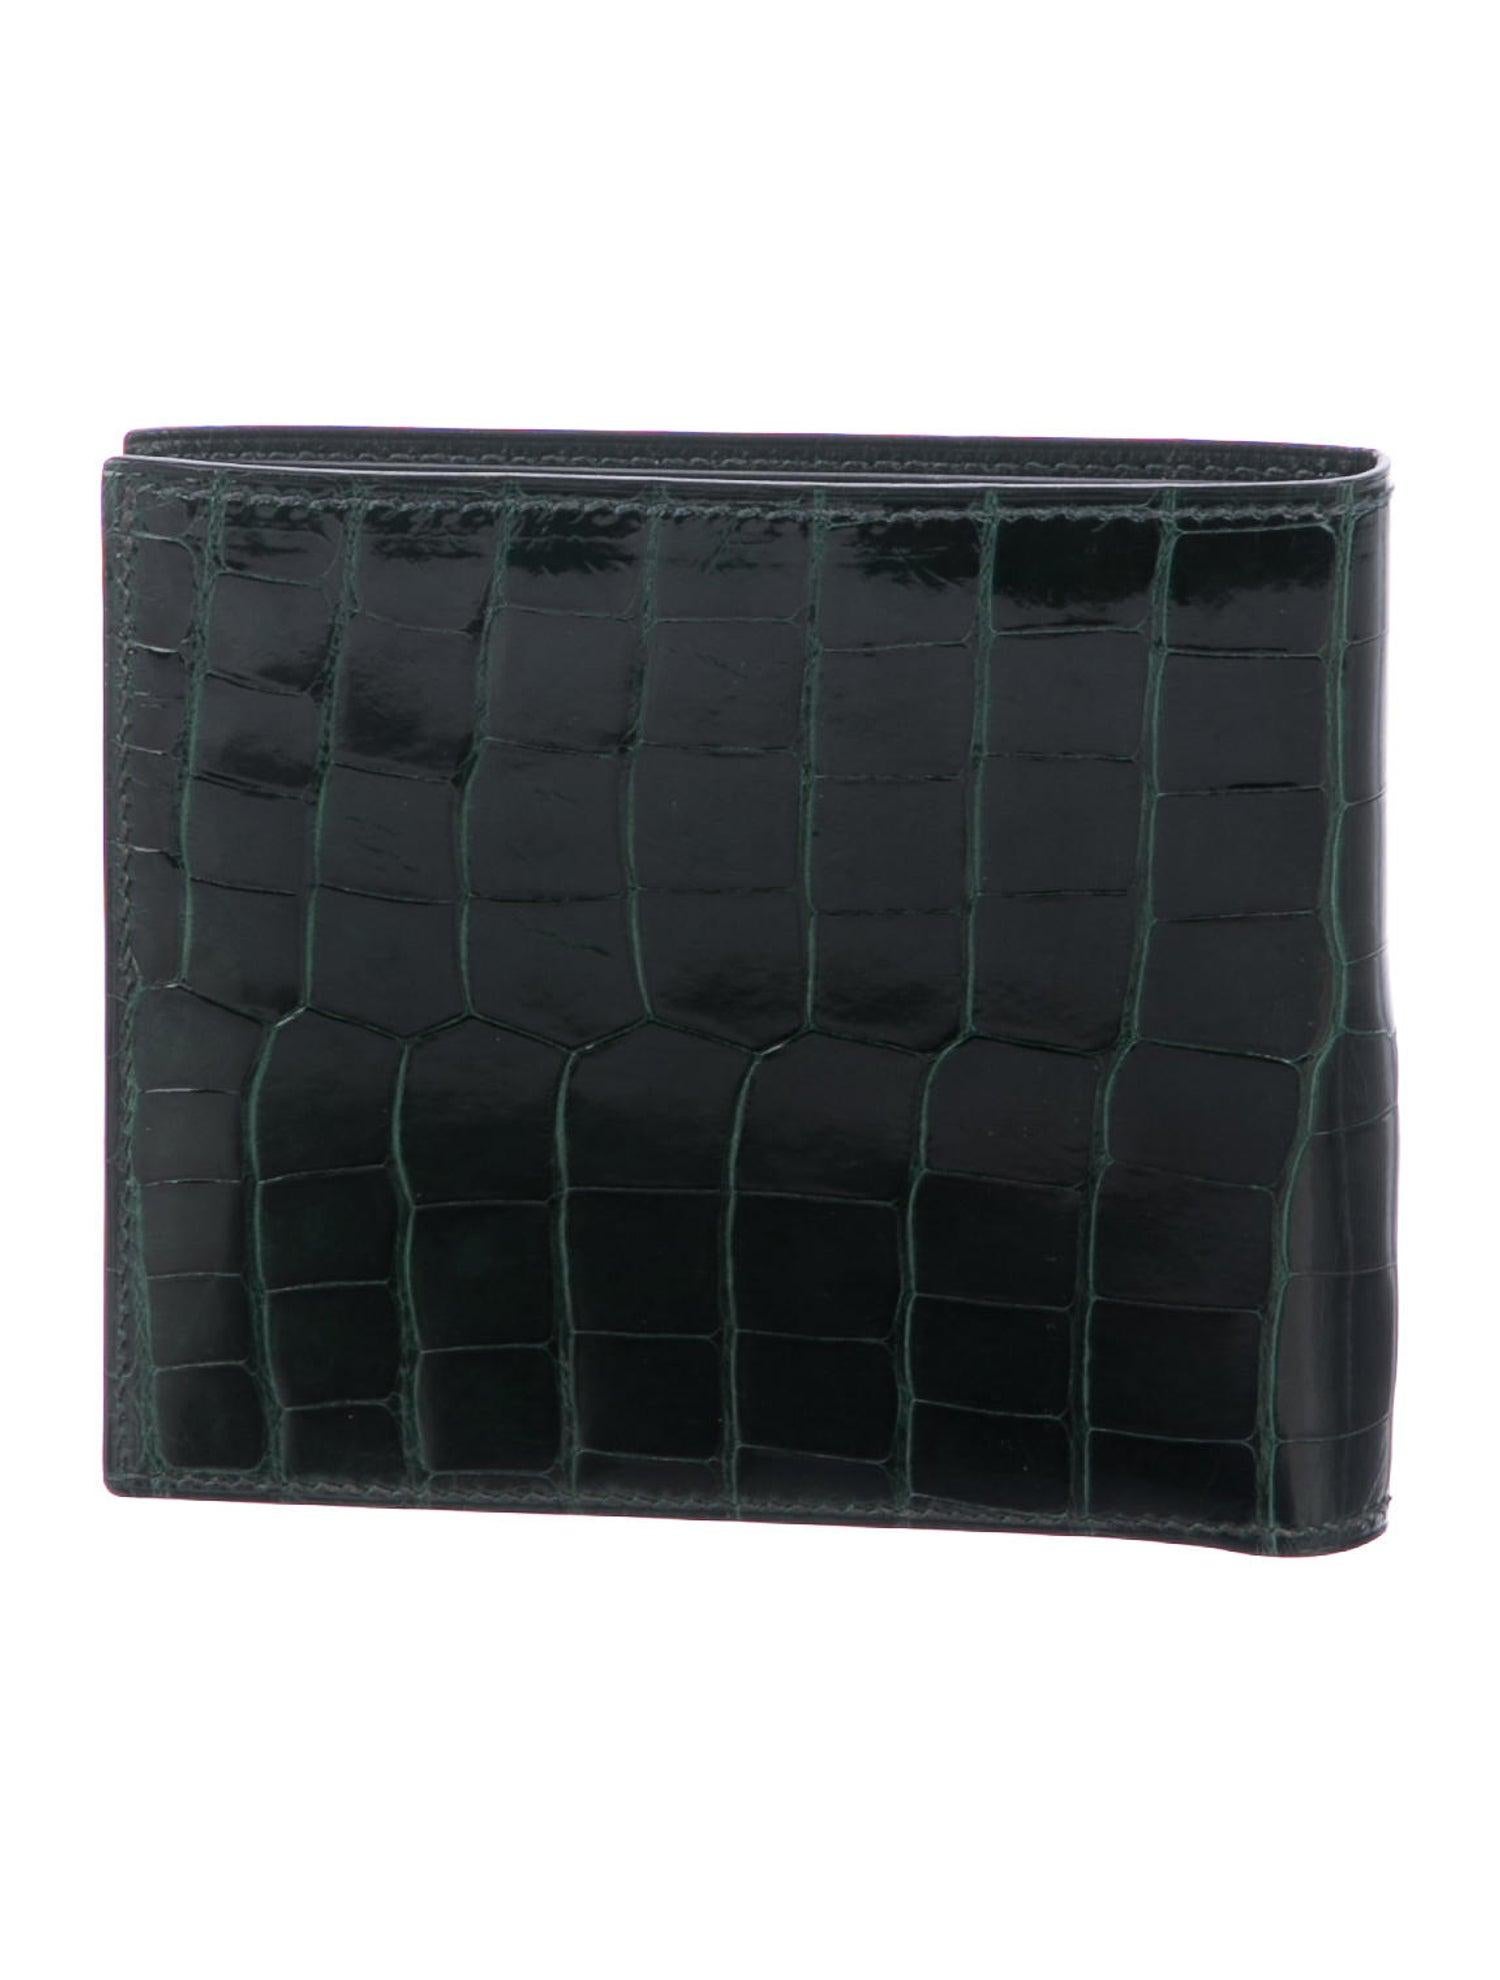 Hermes Emerald Green Alligator Exotic Leather Men's Suit Bifold Bifold Pocket Wallet 

Alligator 
Leather lining
Fold over closure
Features eight interior card slots, dual wall pockets and bill compartment 
Date code present
Made in France
Measures